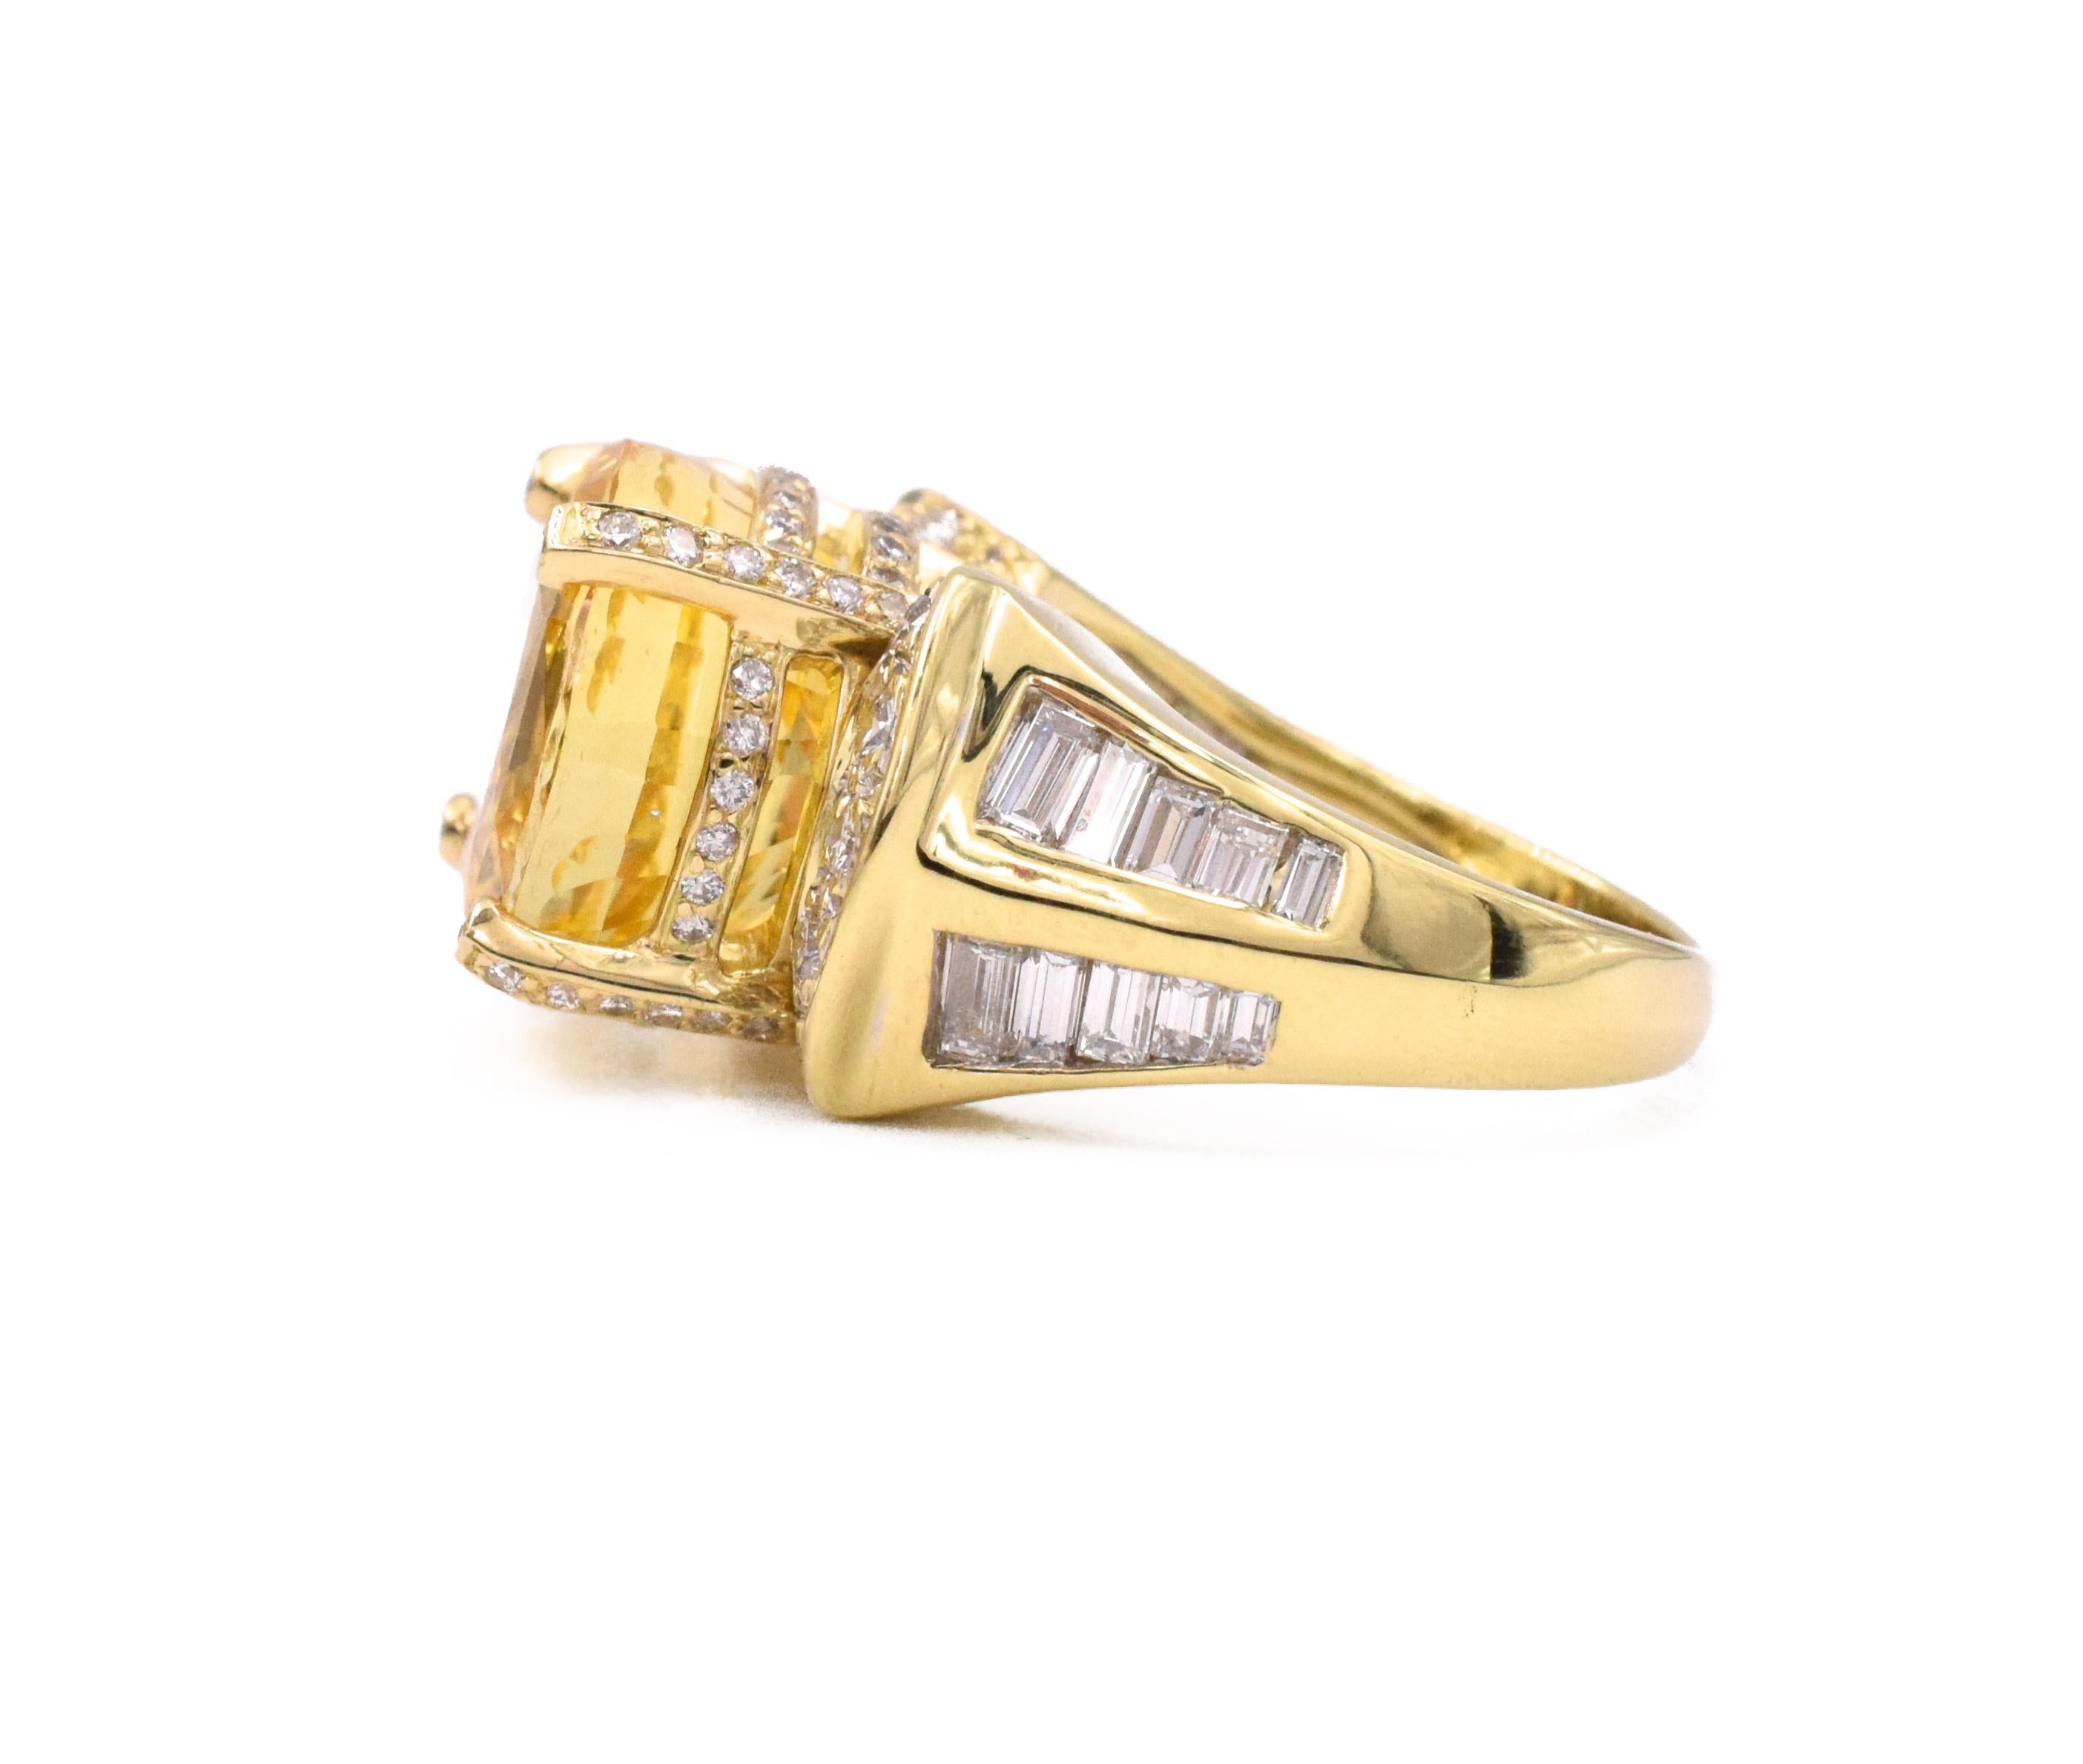 NALLY AGL certified Yellow Sapphire & Diamond Ring In 18k Yellow Gold. In the center is 19.65ct oval cut natural, NO  HEAT CEYLON yellow sapphire, AGL certificate number CS xxxxxx set in 18k yellow gold mounting. Accented with 89 round brilliant cut